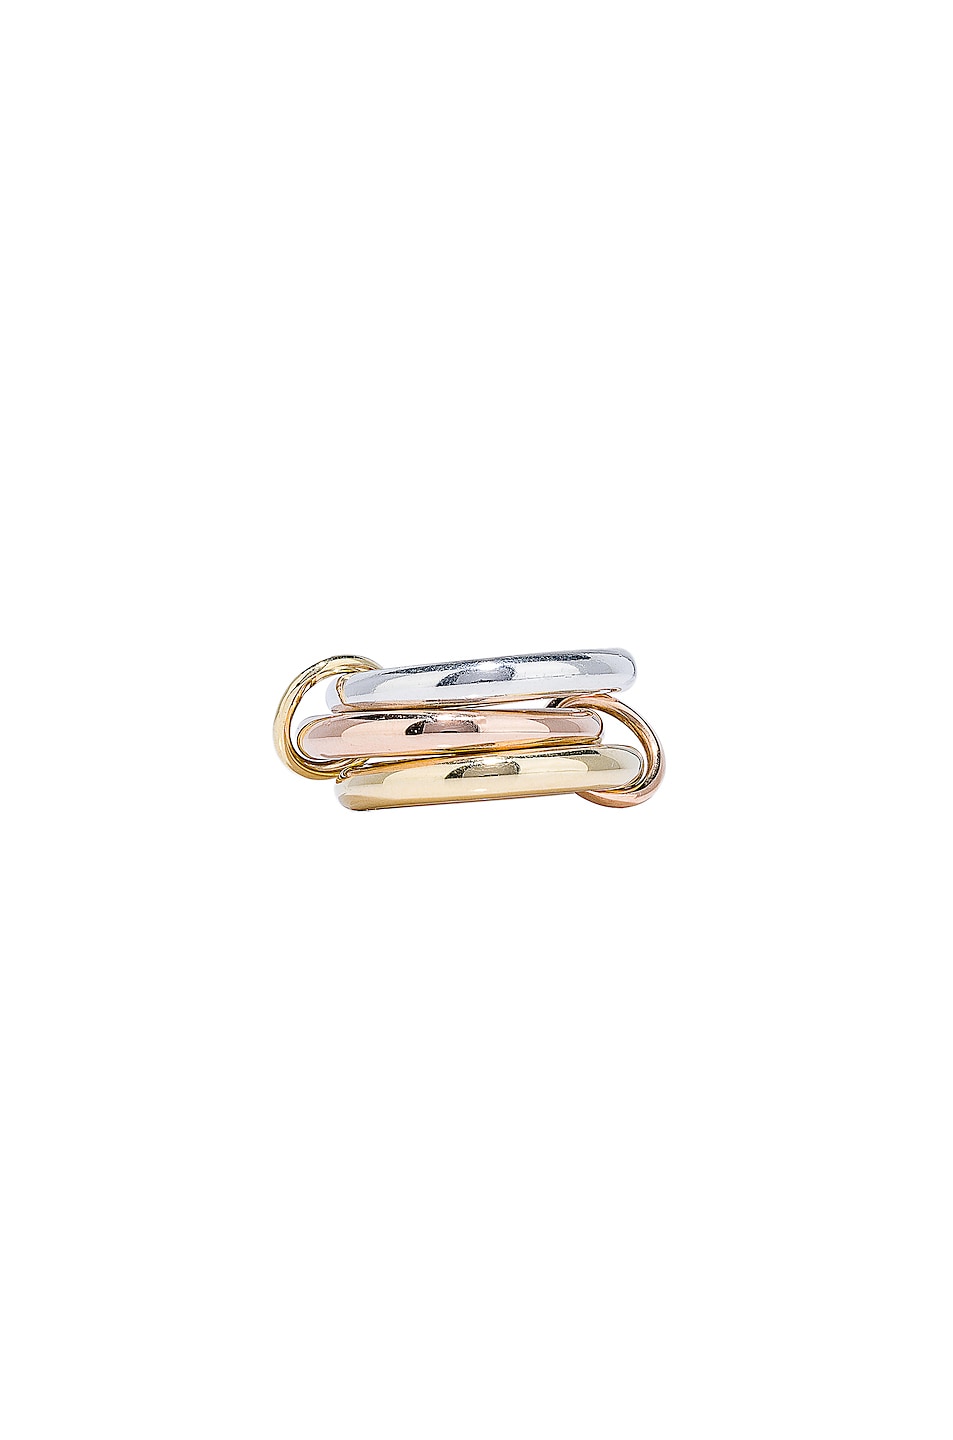 Image 1 of Spinelli Kilcollin Mercury Ring in Sterling Silver, 18K Rose Gold, and 18K Yellow Gold